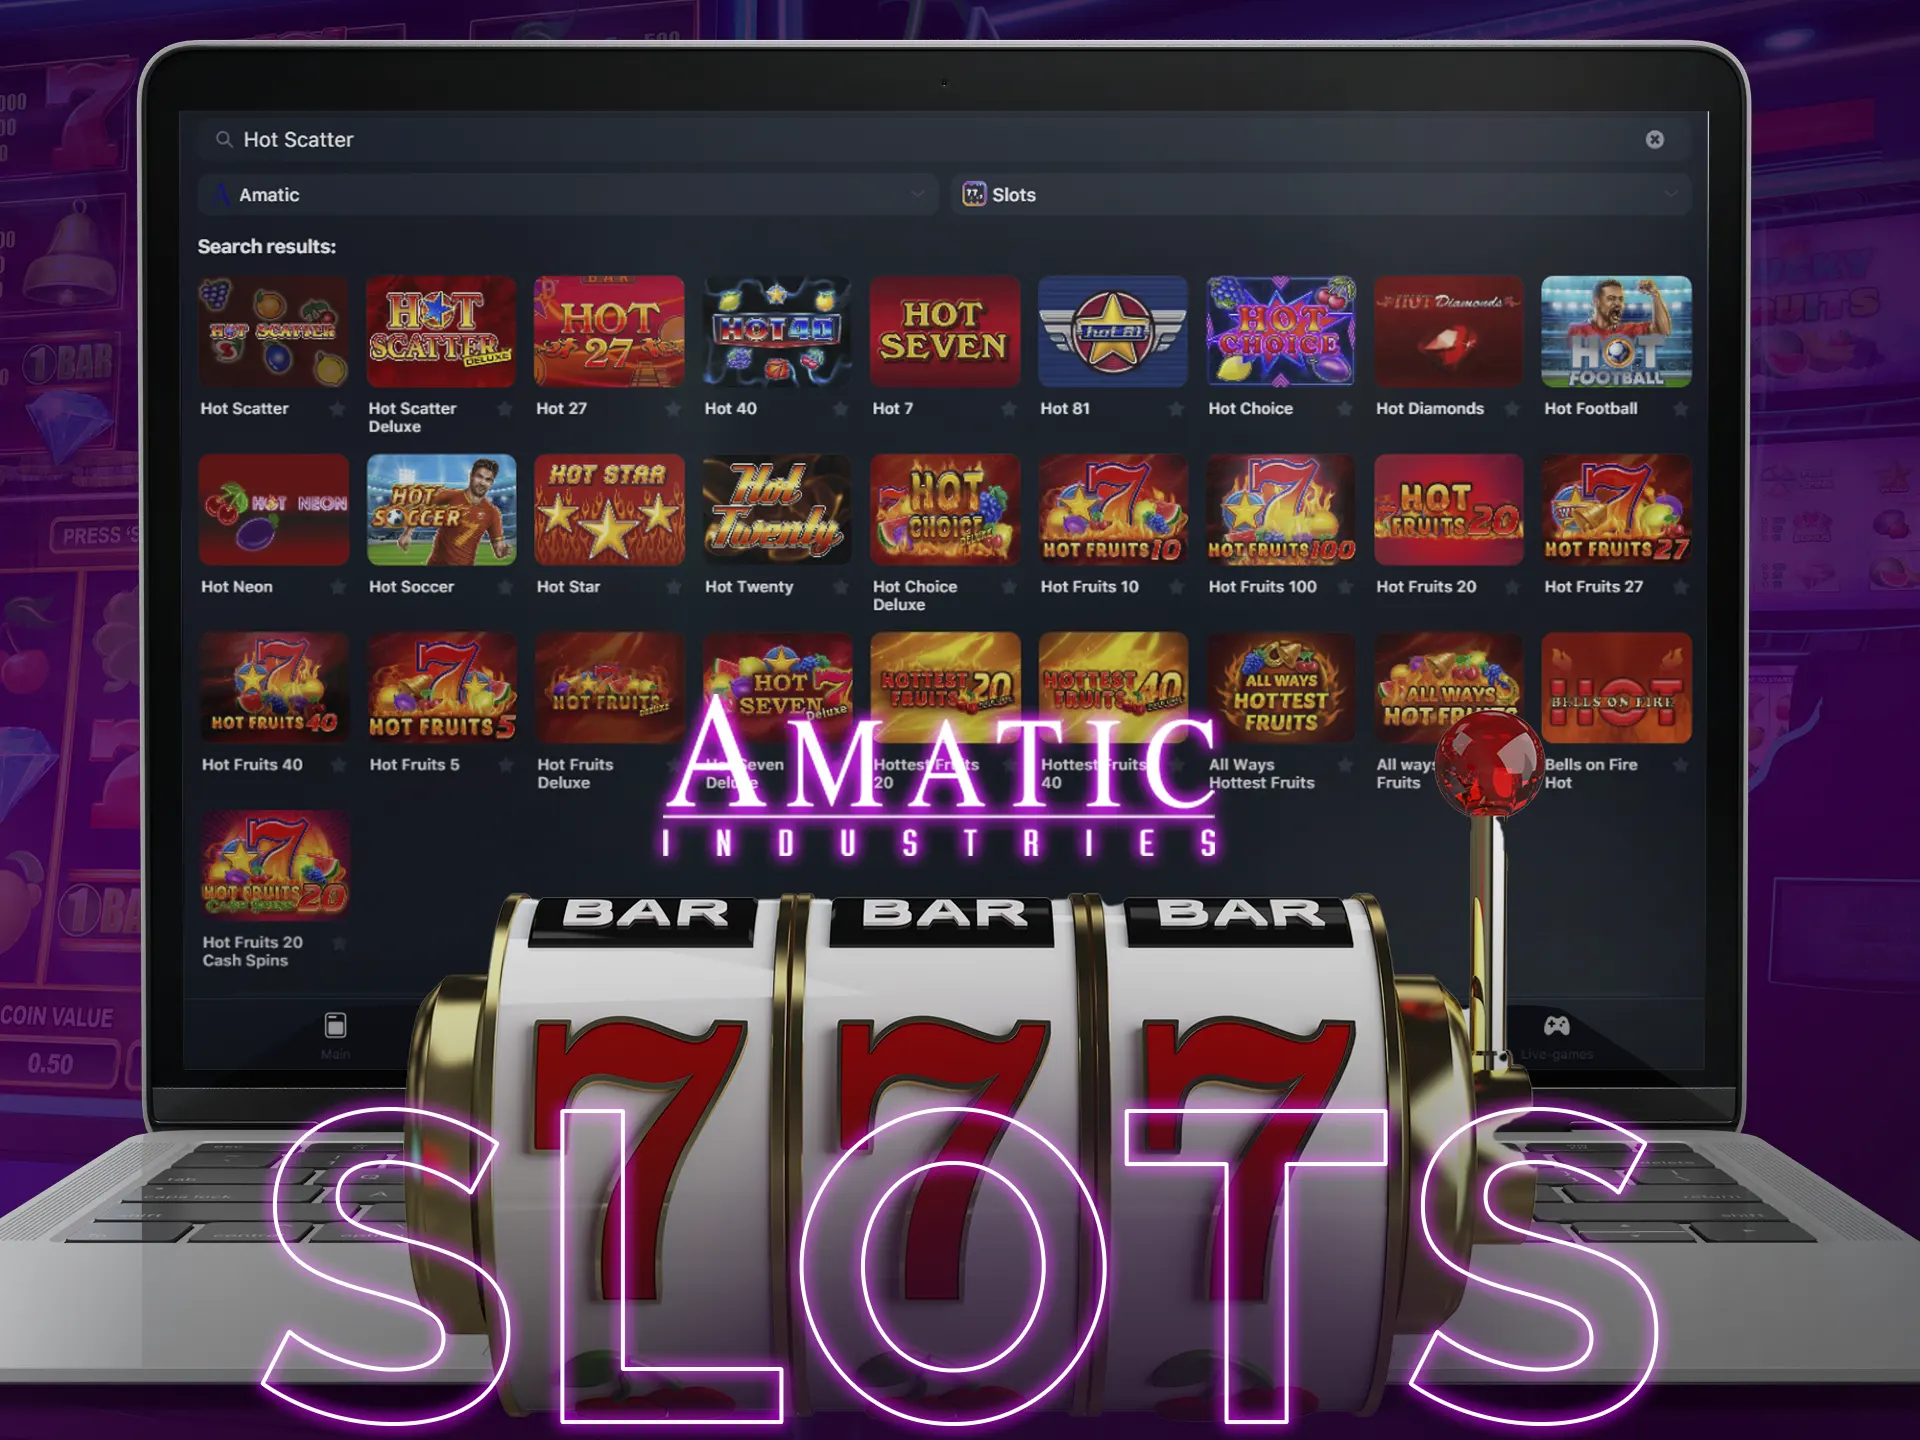 Amatic has 200 slots, you will find your favorite game.